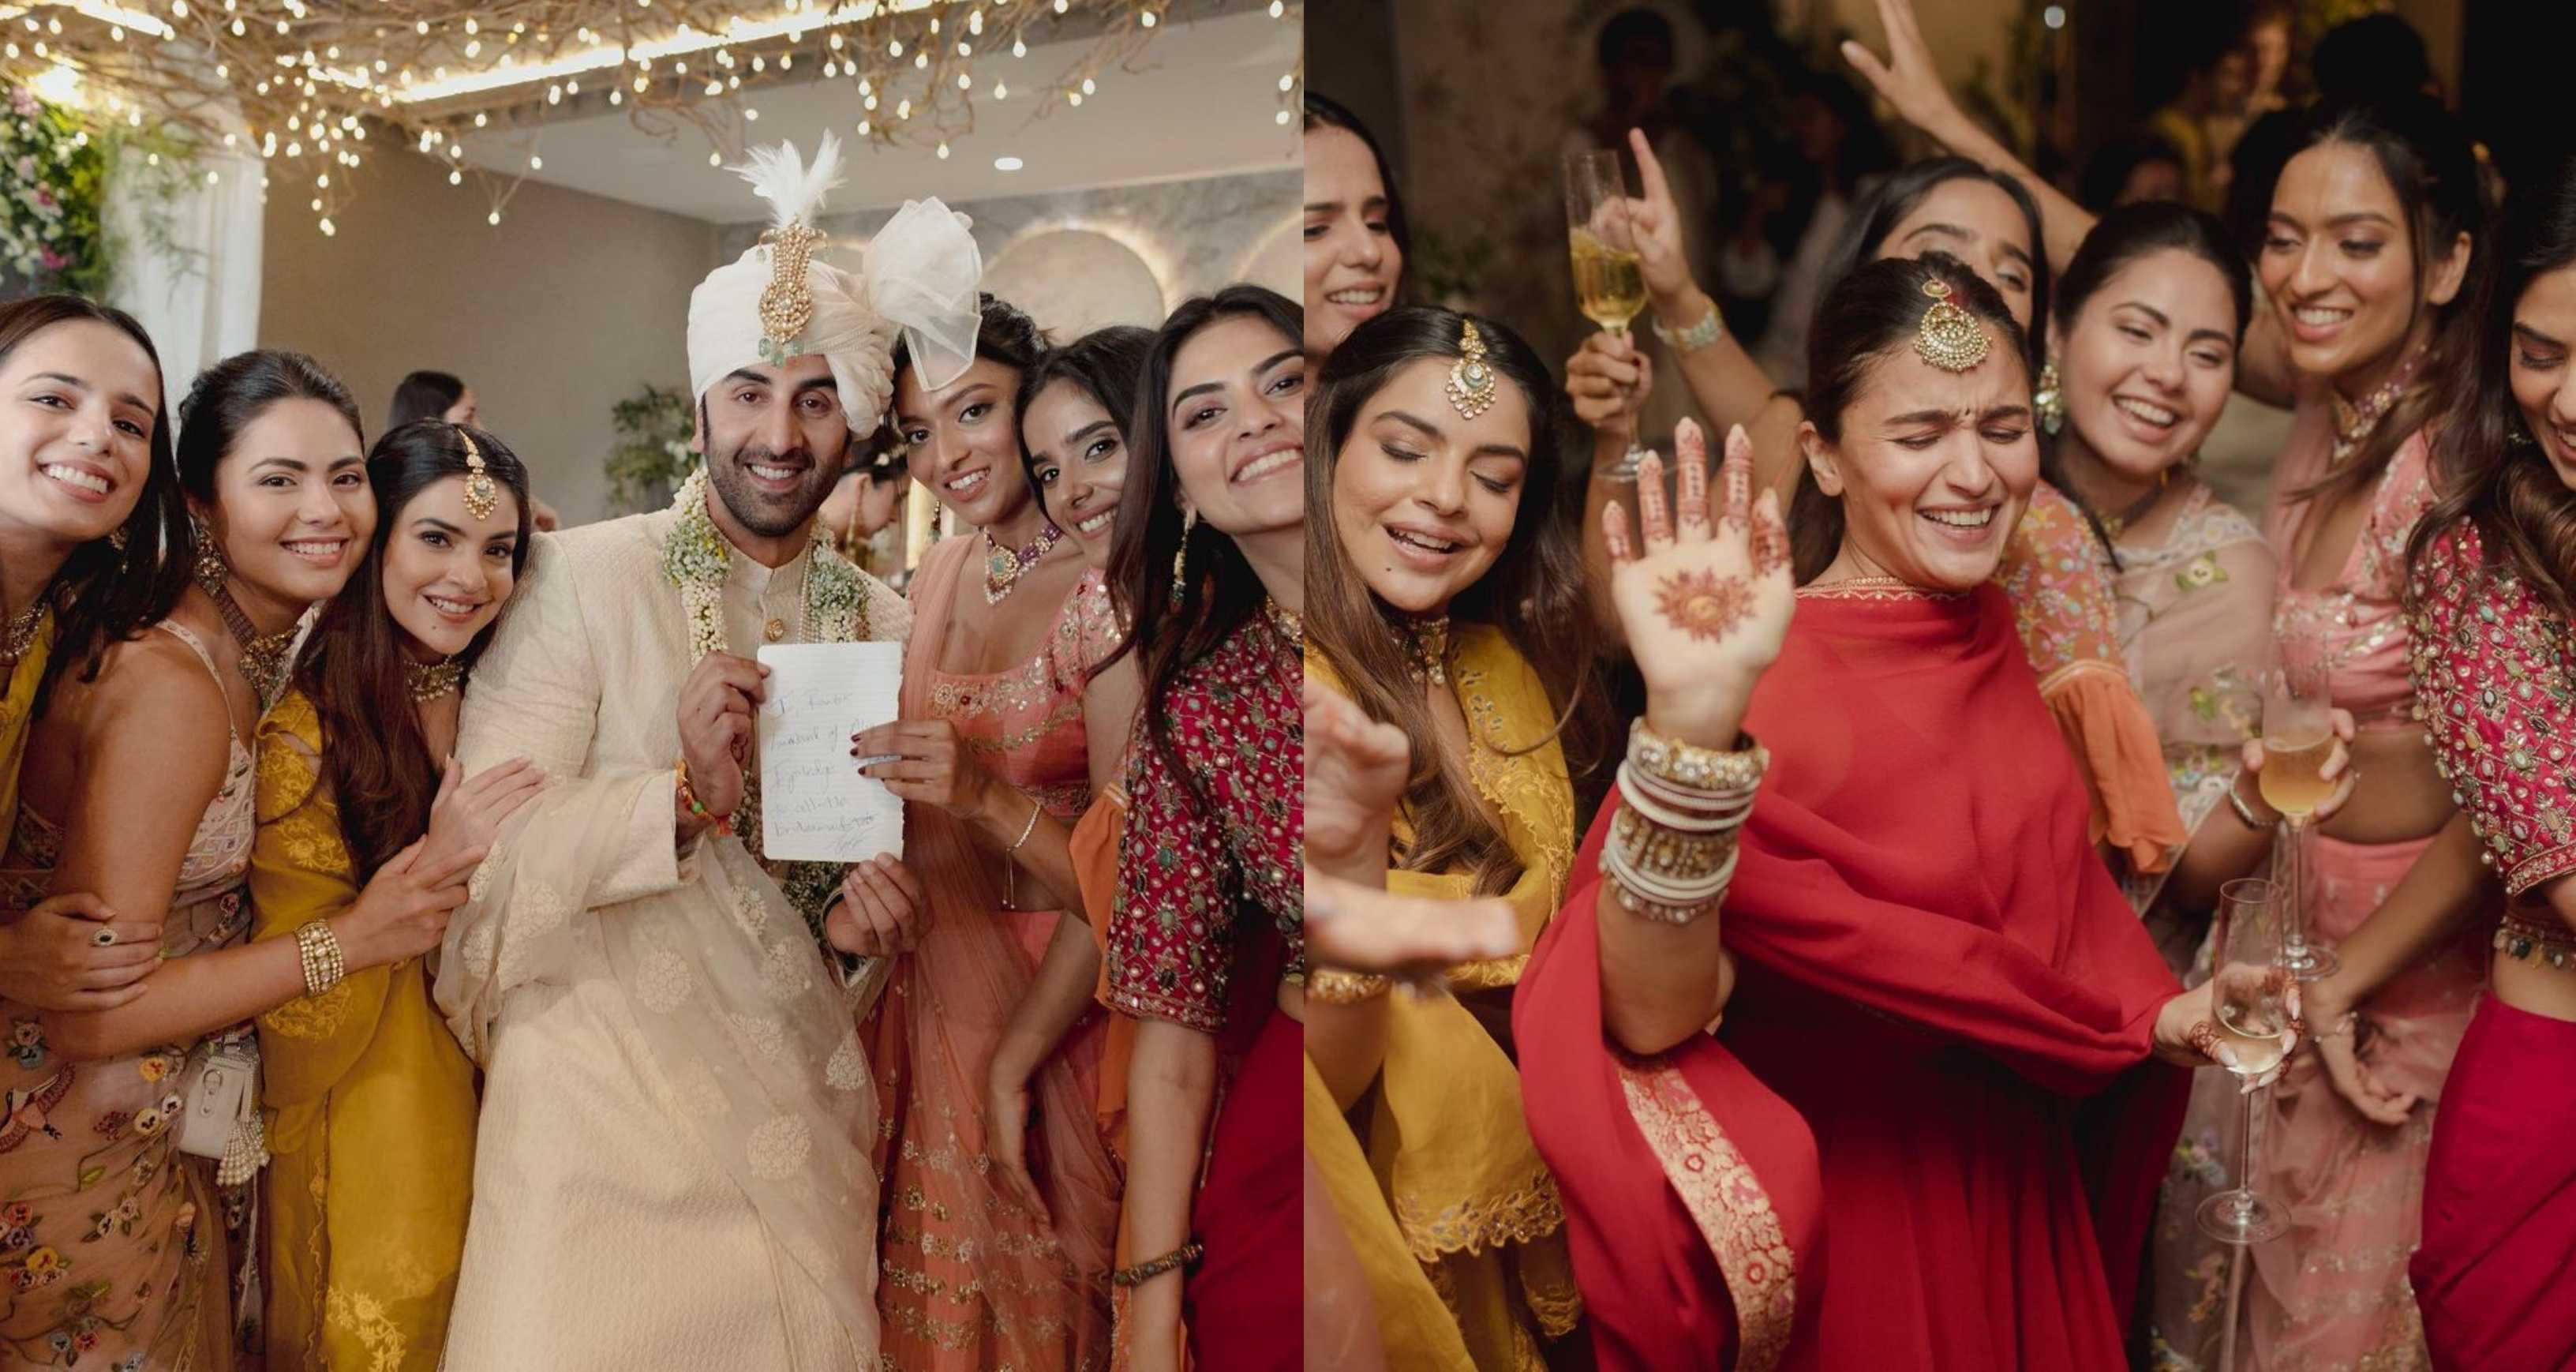 Ranbir Kapoor poses with wife Alia Bhatt’s bridesmaids in unseen pics; bride dances her heart out at after party